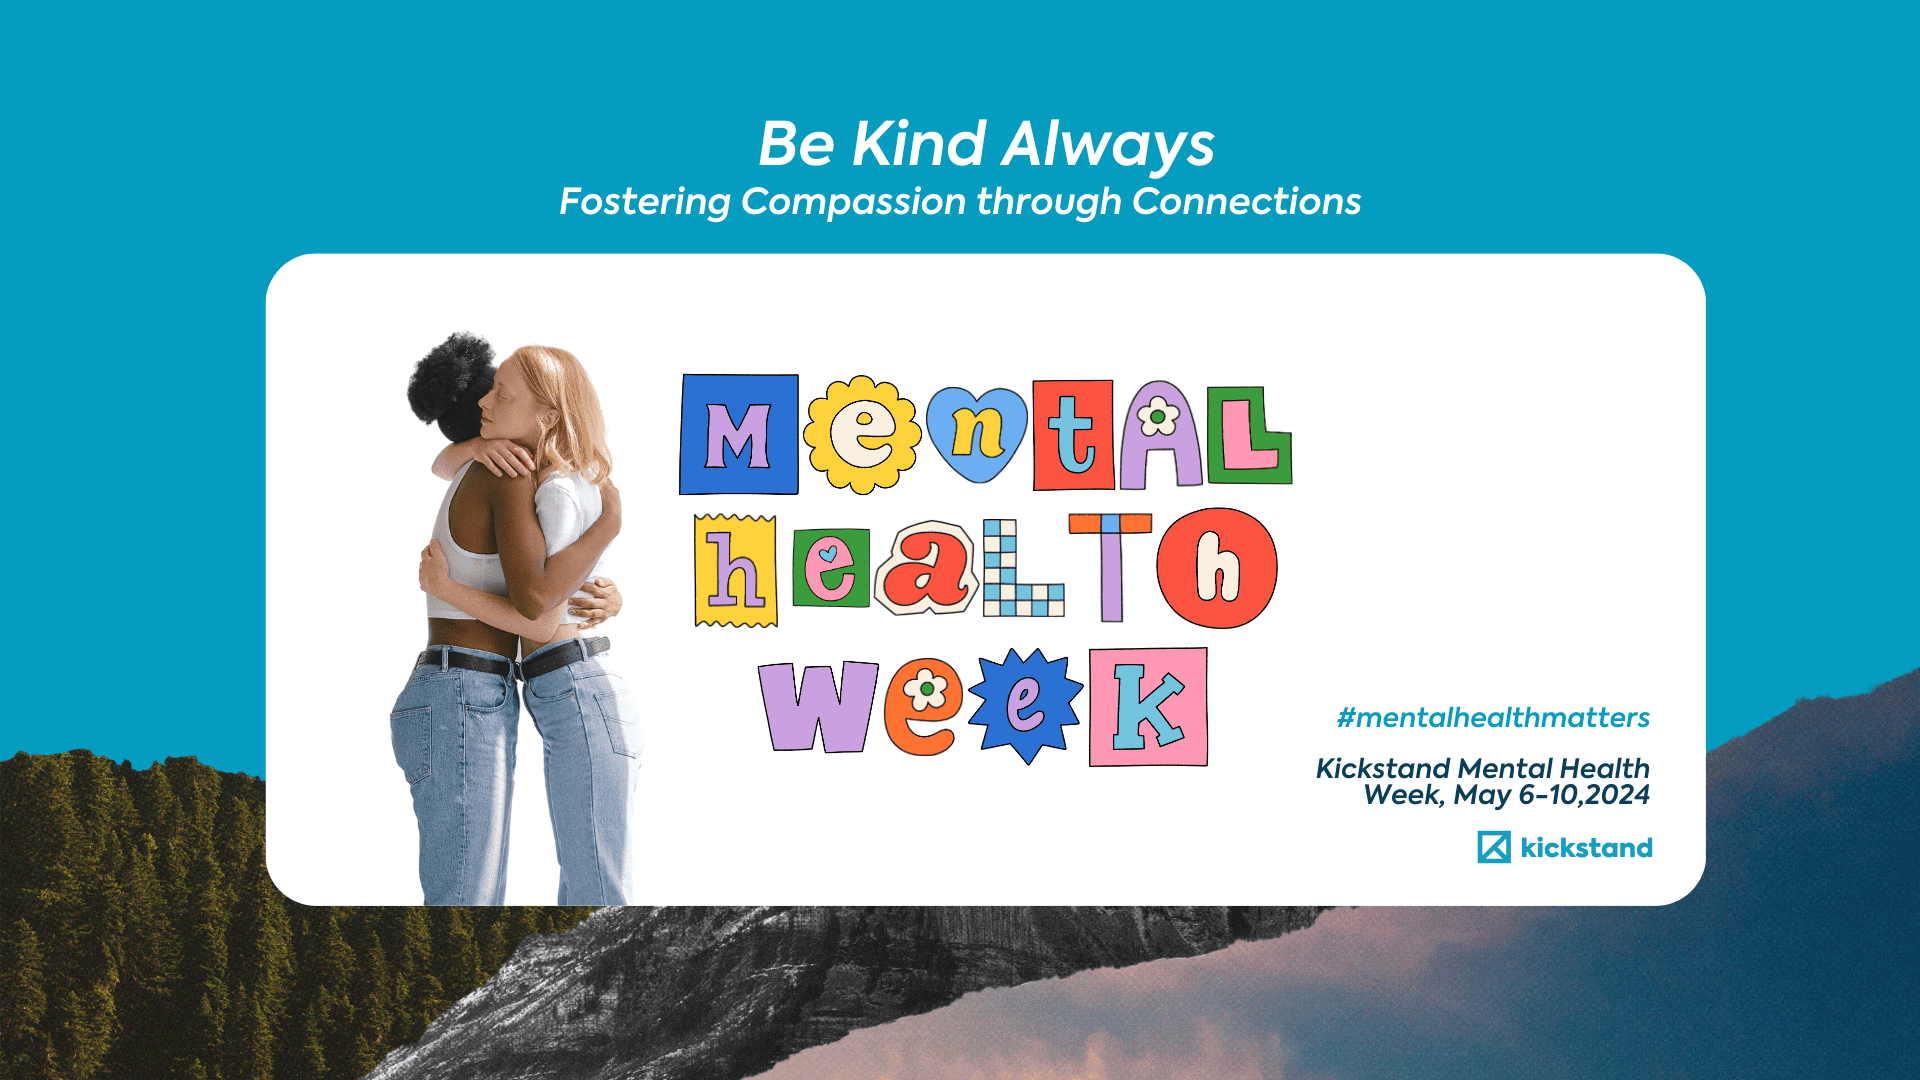 Be Kind Always. Fostering Compassion through Connections for Kickstand Mental Health Week Campaign 2024 #MentalHealthMatters